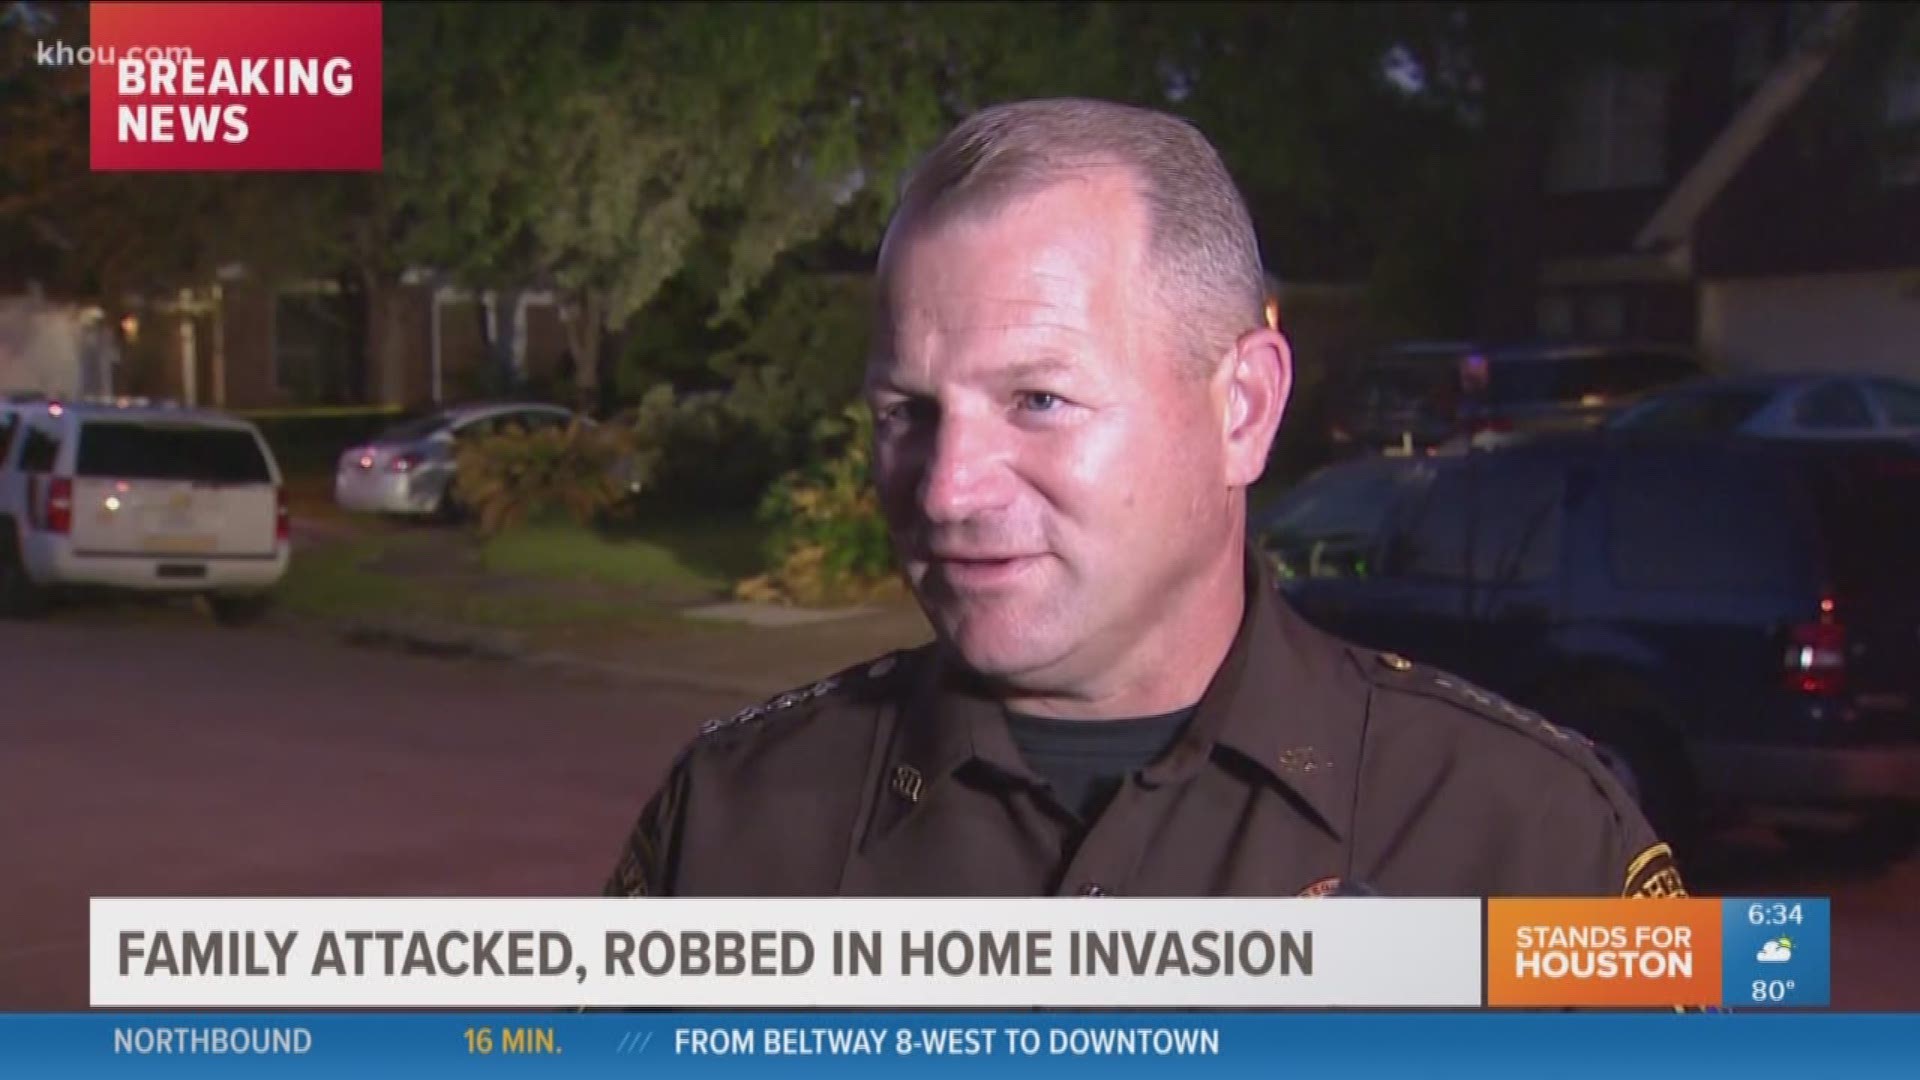 A child was among four victims in a home invasion in Fort Bend County overnight.